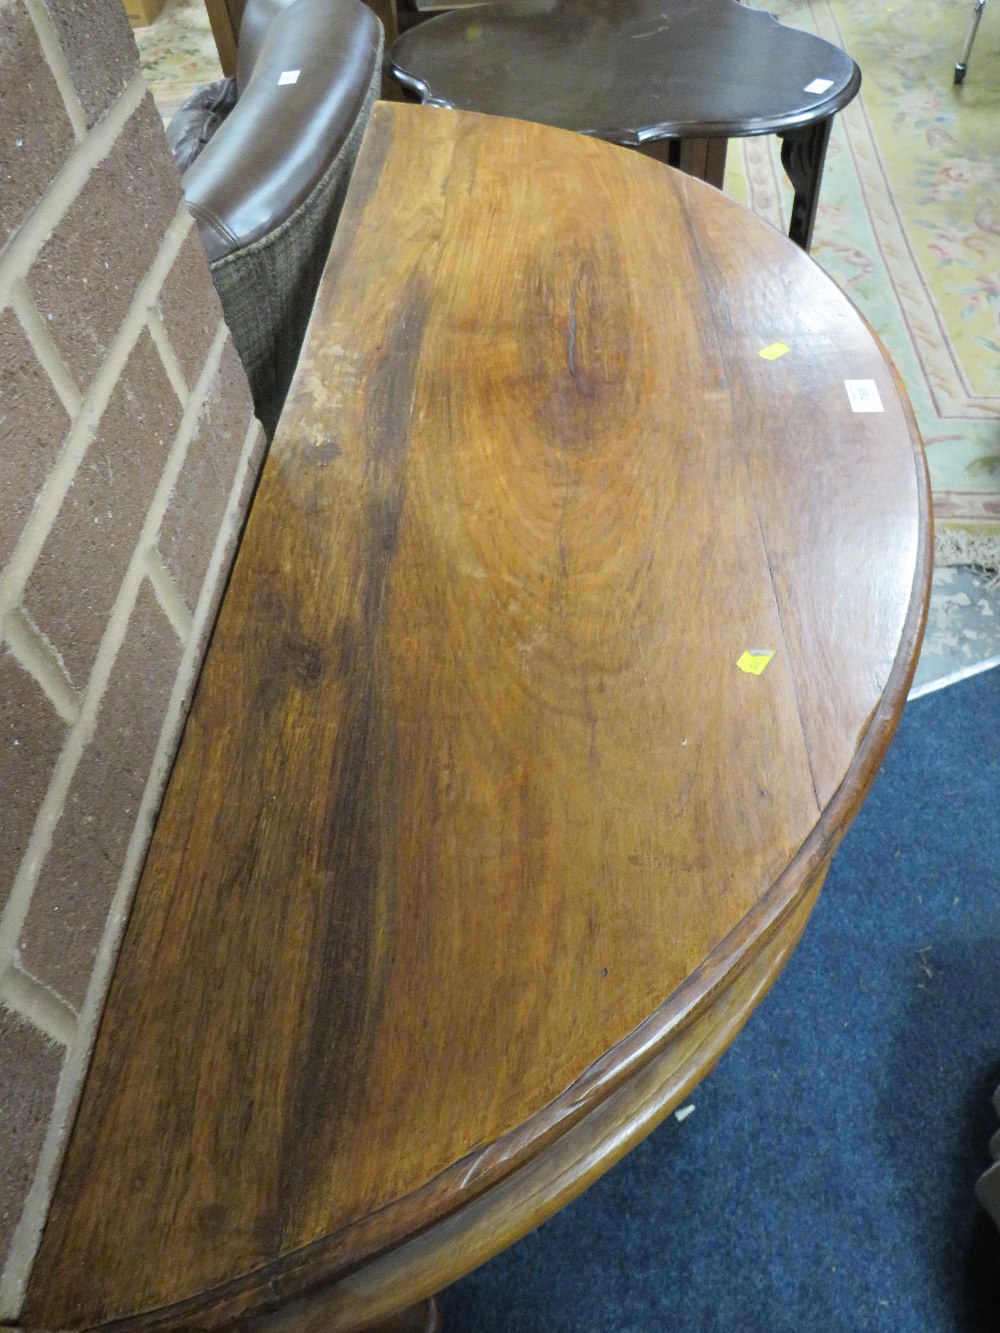 A COLONIAL STYLE HALF MOON TABLE TOGETHER WITH A GILT MIRROR - Image 2 of 2